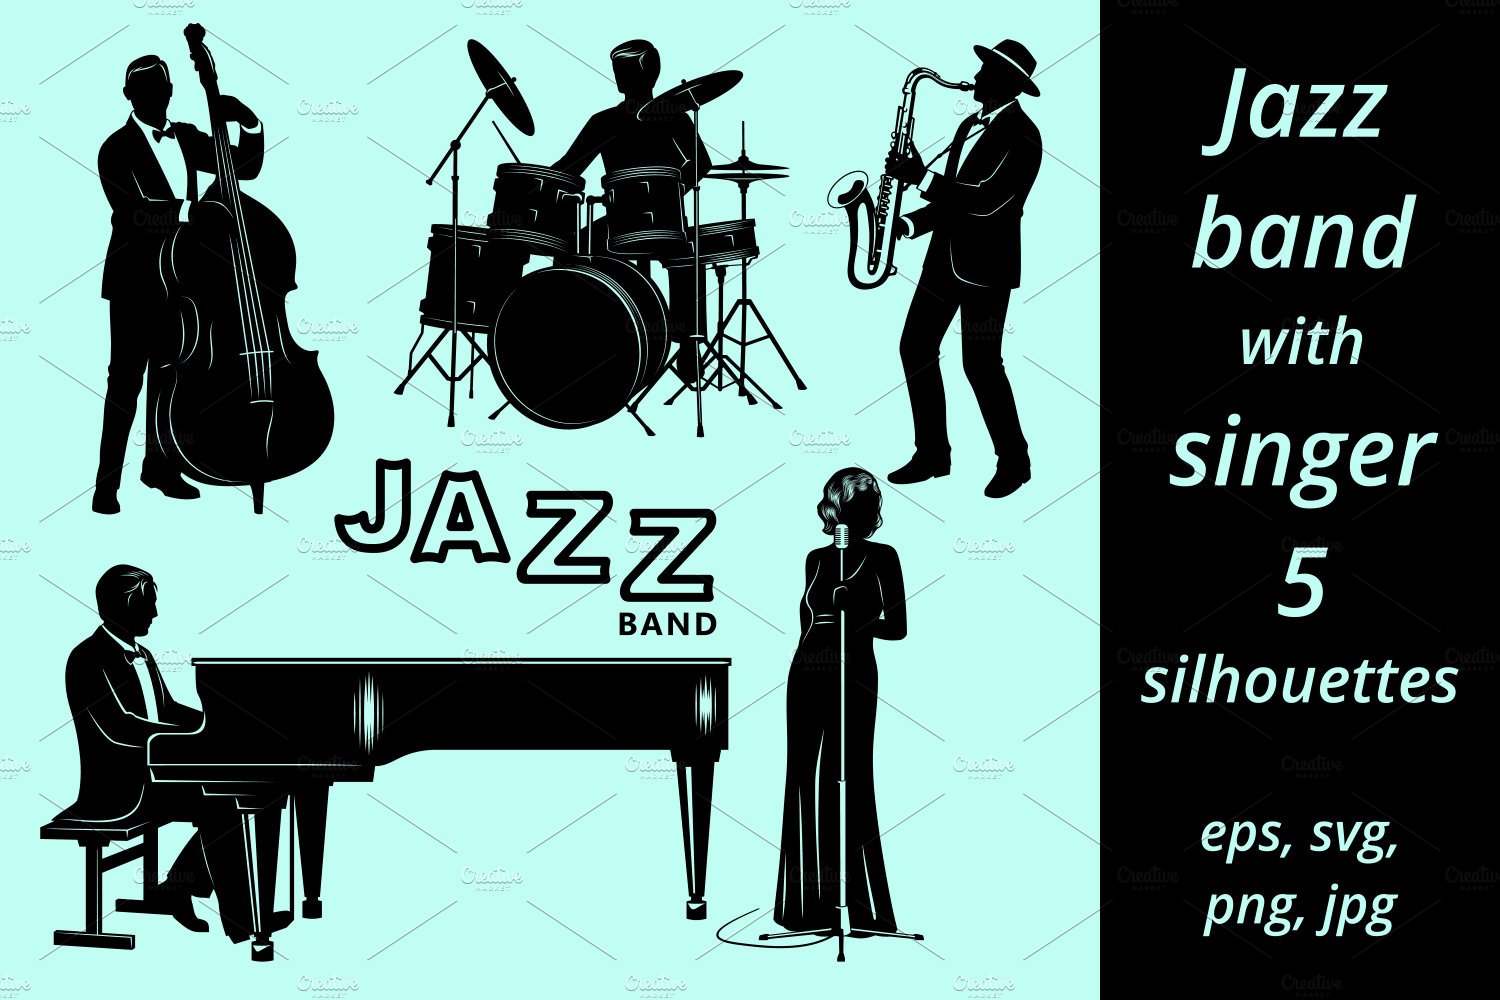 Jazz Band with Singer Silhouettes cover image.